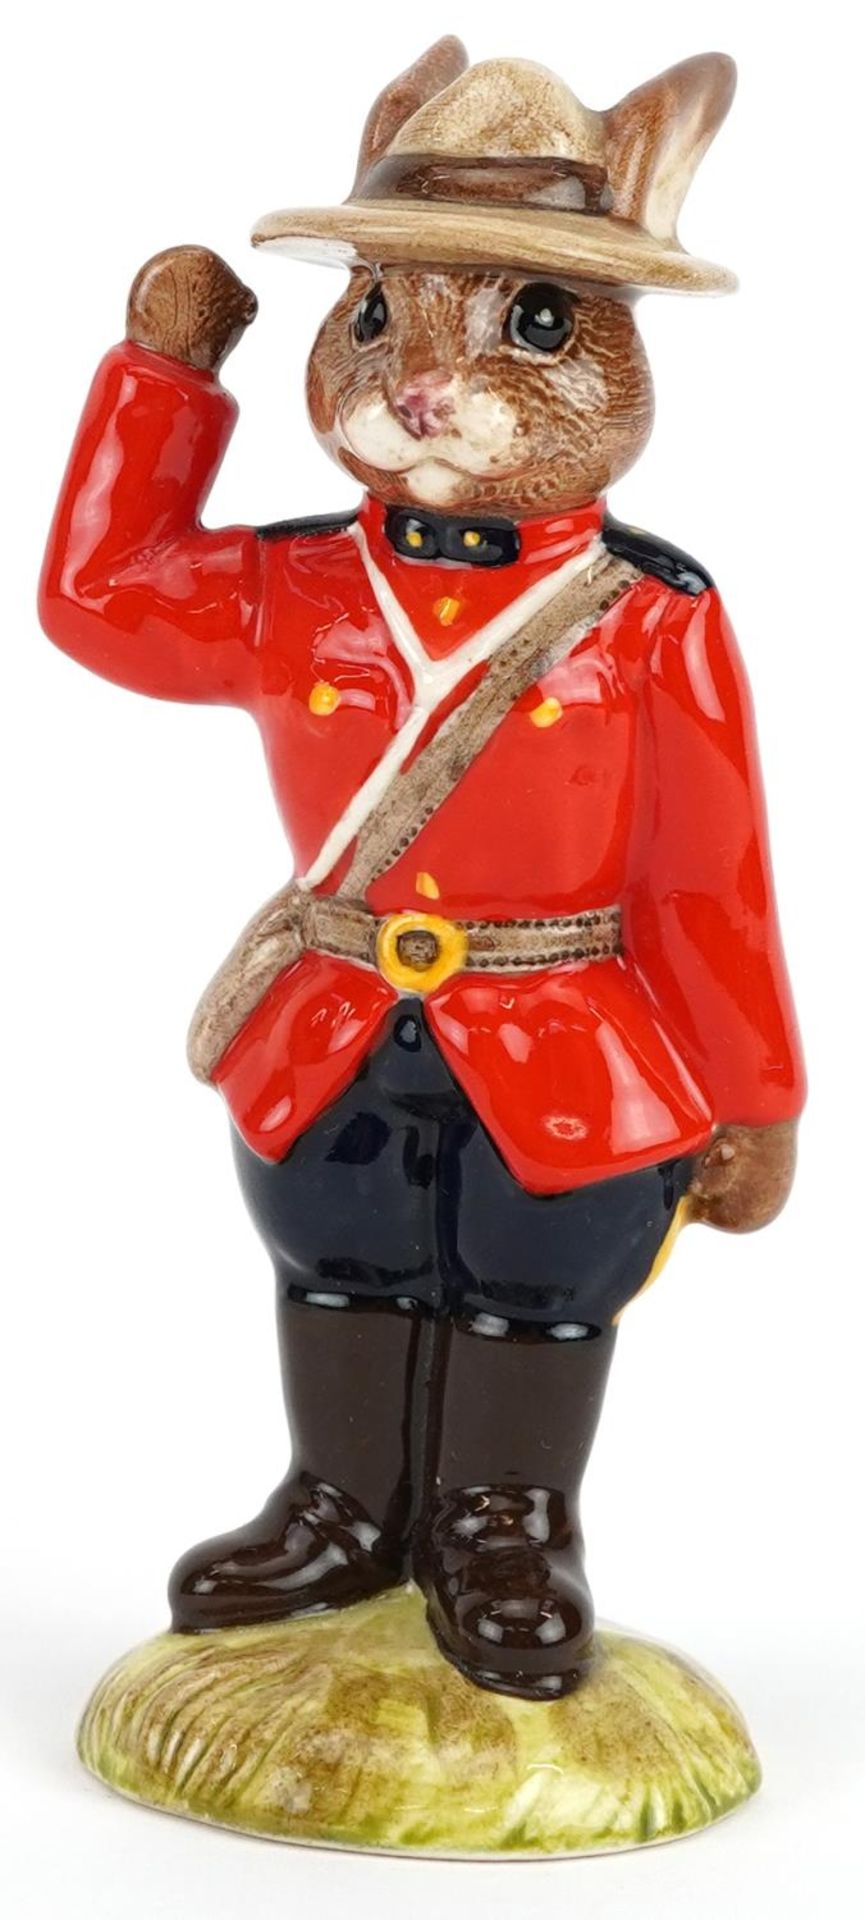 Royal Doulton Mountie Bunnykins figure DB135 Special edition of 750, 10cm high : For further